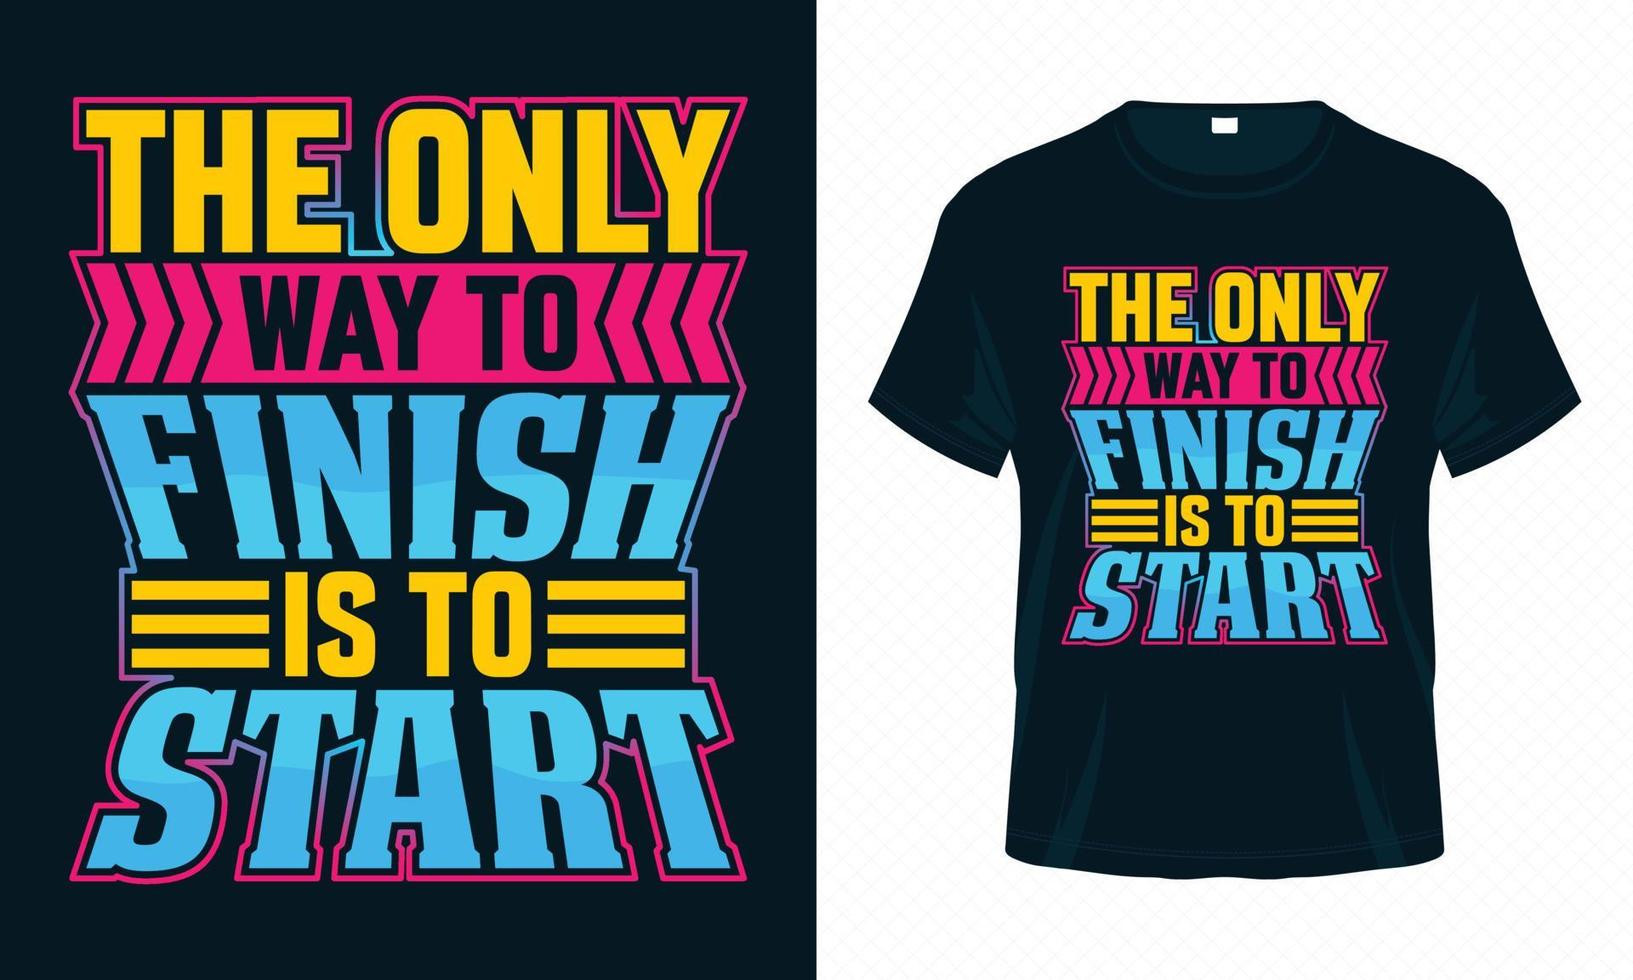 The Only Way to Finish is to Start-Motivational Typography T-shirt Design Vector. Inspirational Quotes for Clothes, Greeting Card, Poster, Tote Bag and Mug Design. vector